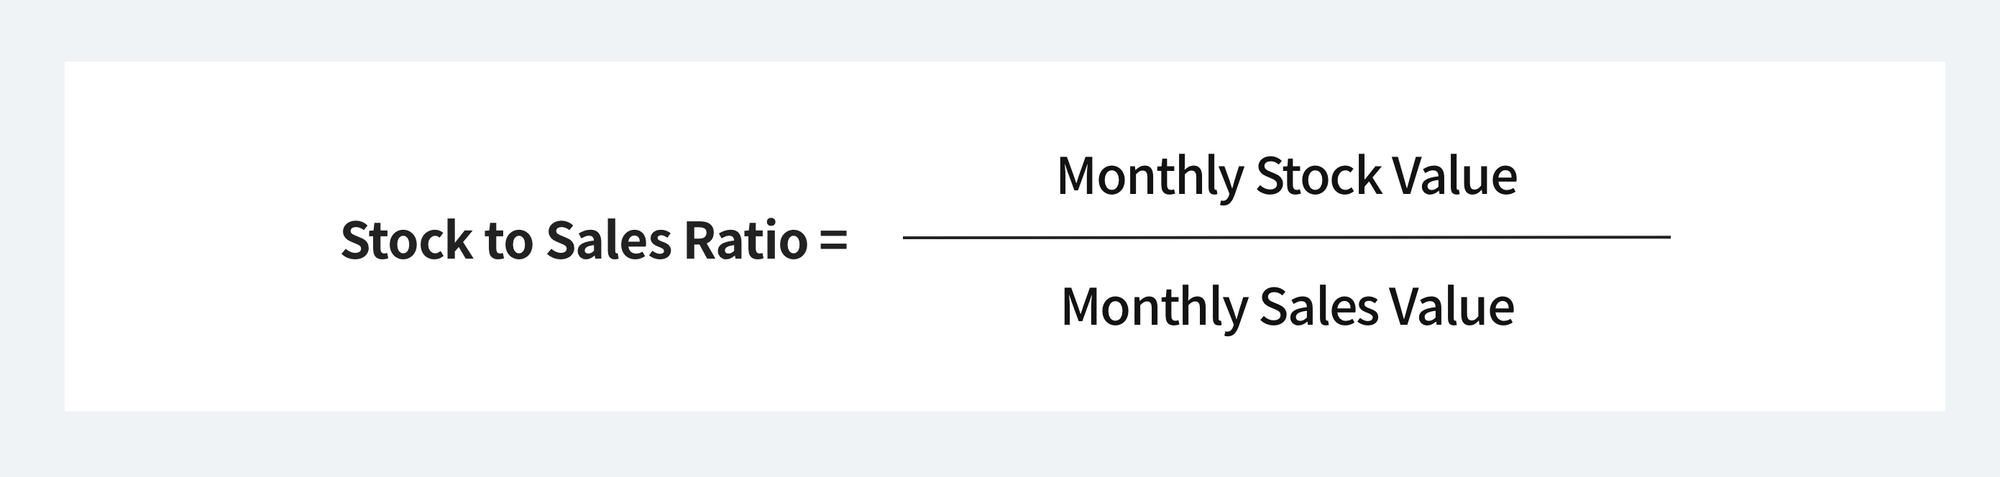 Stock to Sales Ratio = Monthly Stock Value / Monthly Sales Value